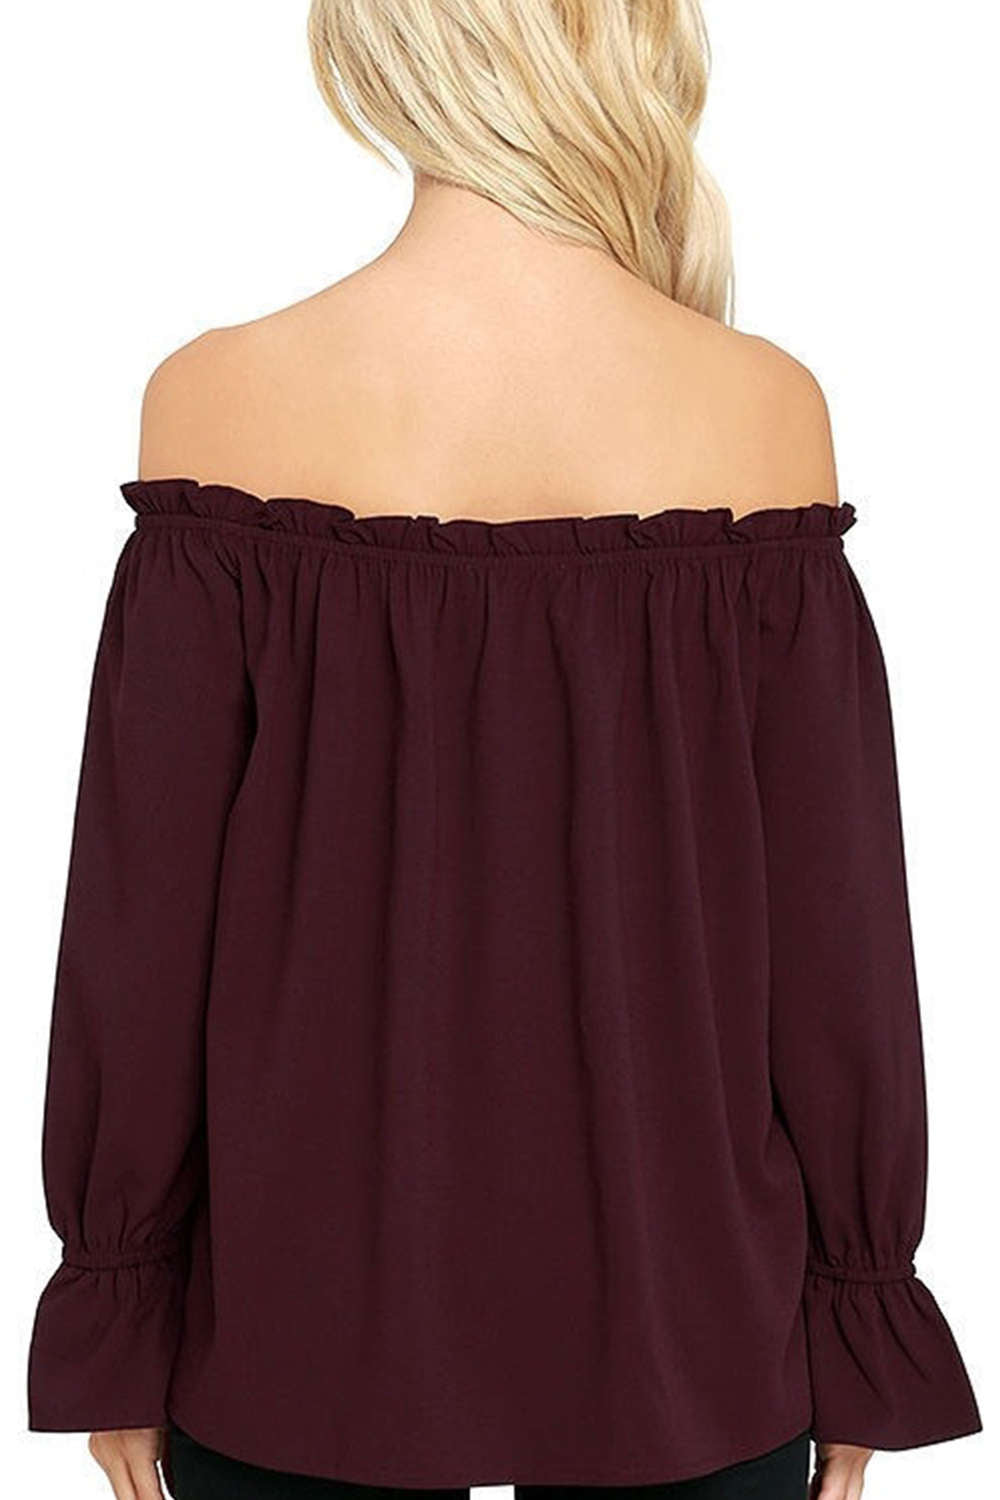 Iyasson Ruffled Edging Off-the Shoulder Top